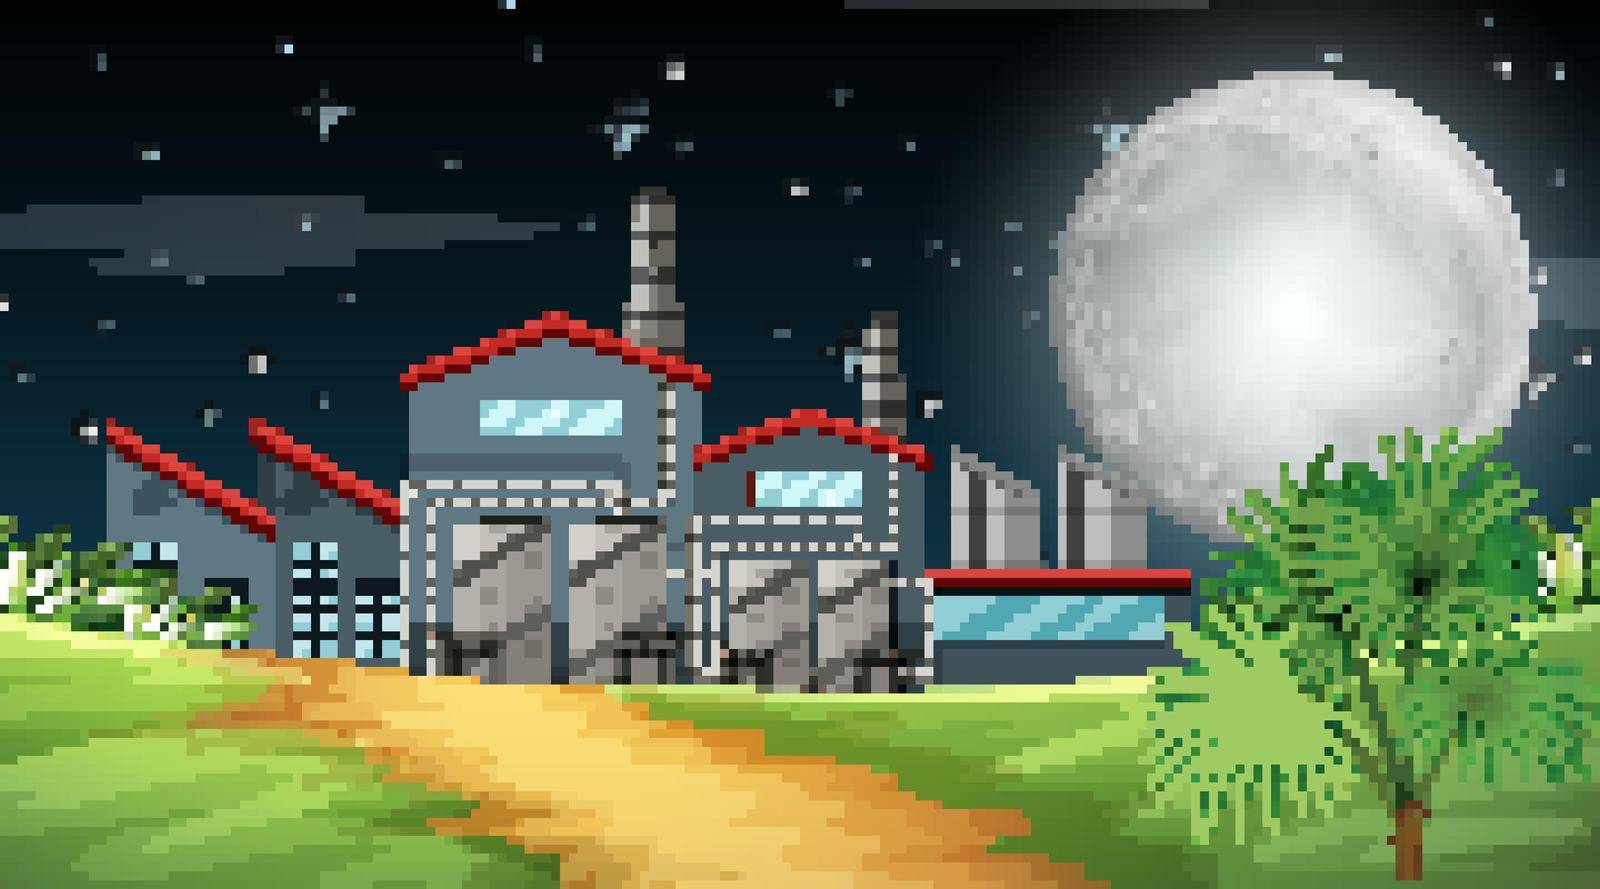 Pollution from factory theme scene in nature illustration